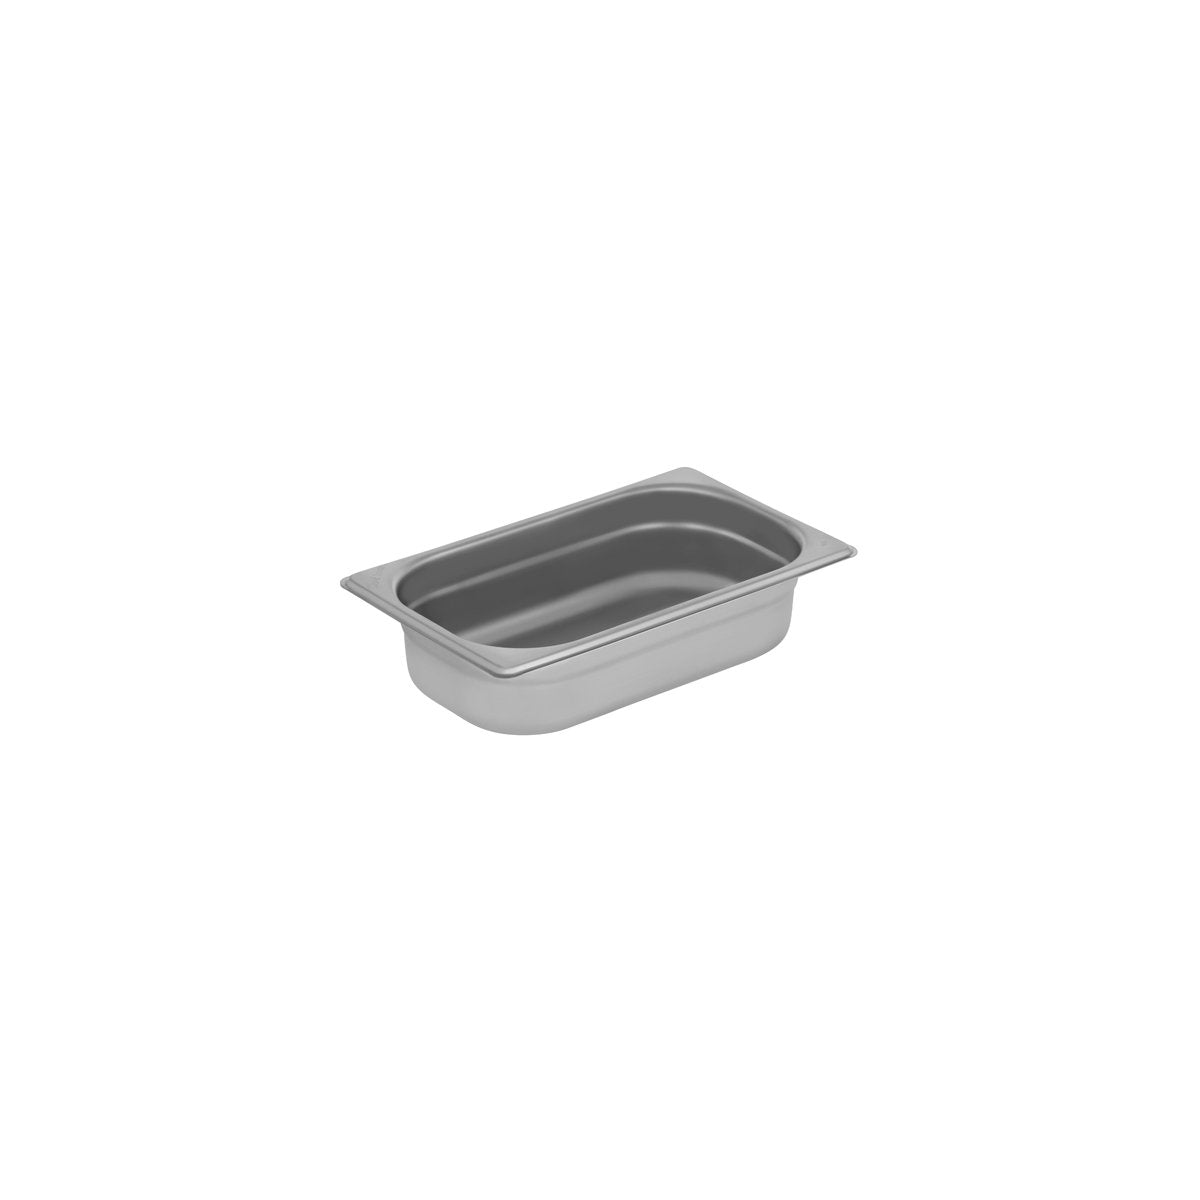 GN-14065 Chef Inox Gastronorm Pan 1/4 Size 65mm Tomkin Australia Hospitality Supplies